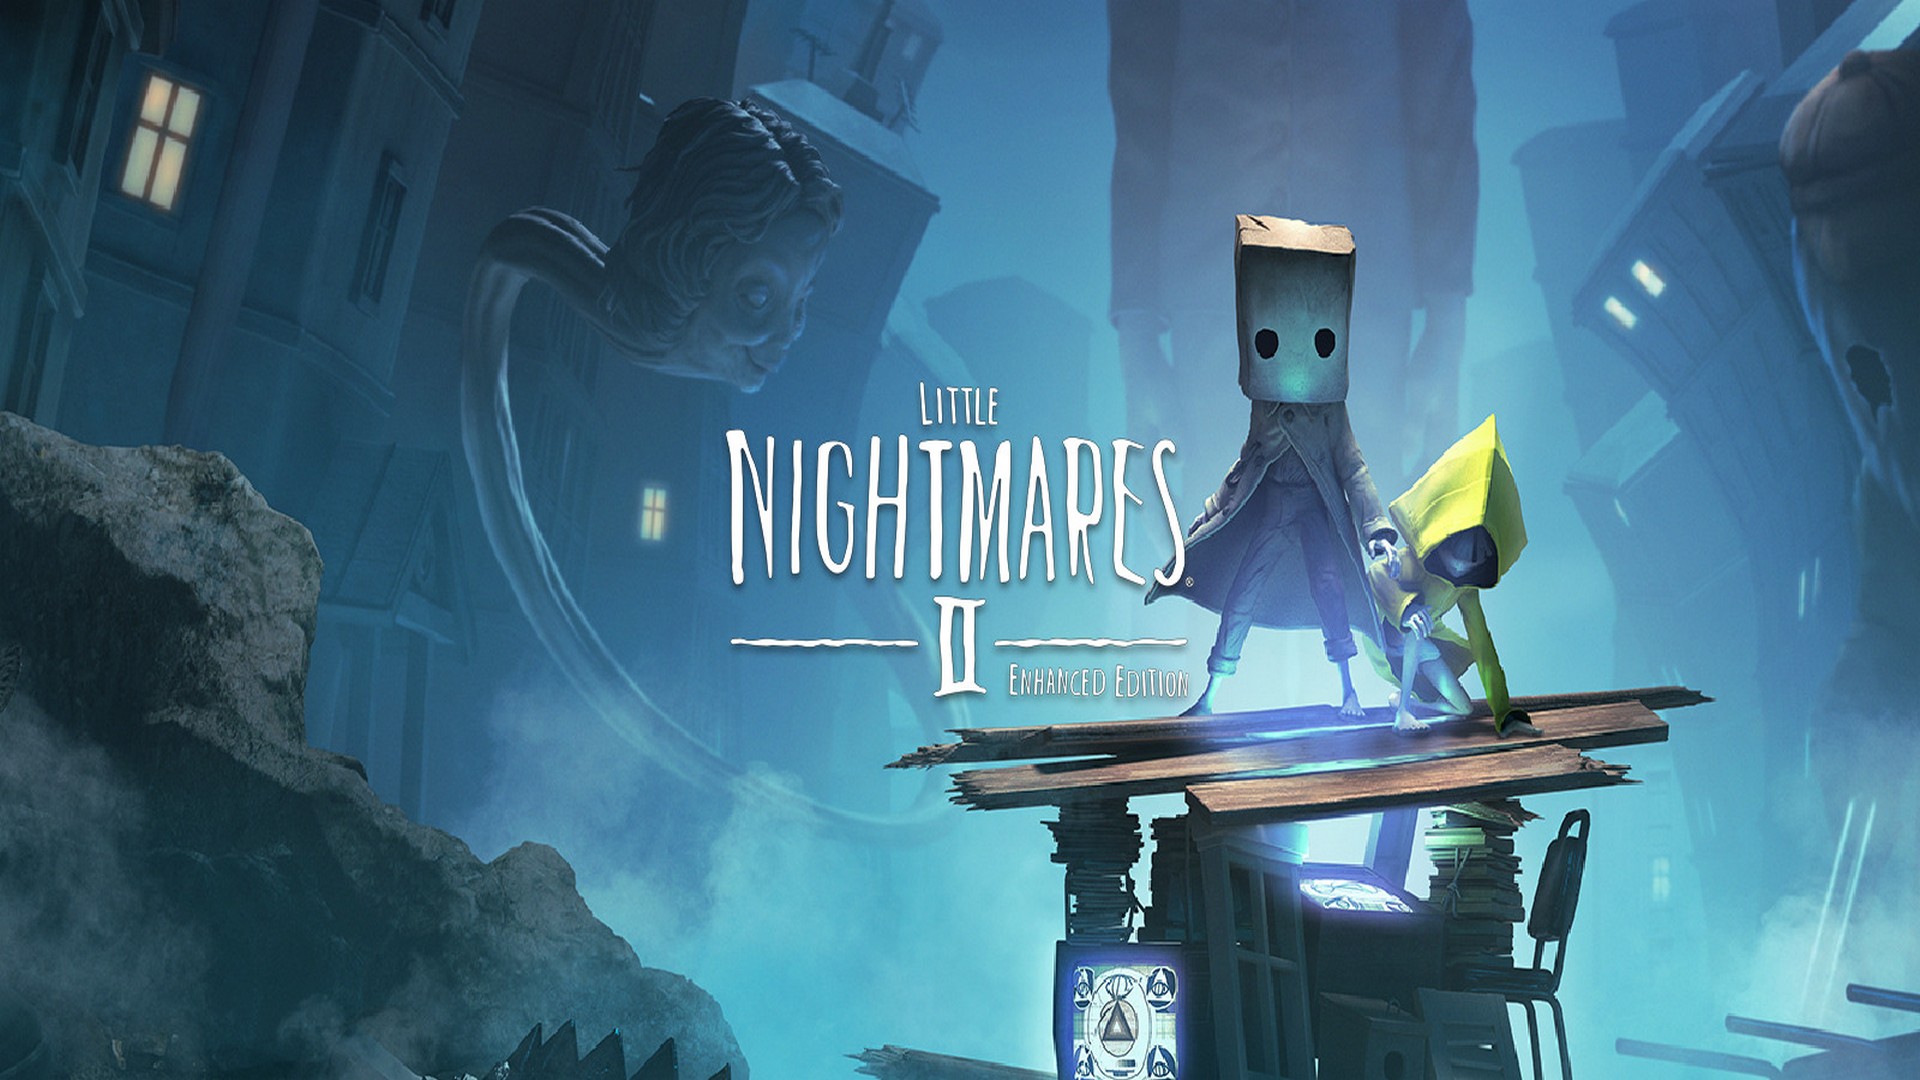 Bandai Namco Kicks Off Gamescom With Little Nightmares II Enhanced Edition – Available Now On PlayStation 5, Xbox Series X|S & PC